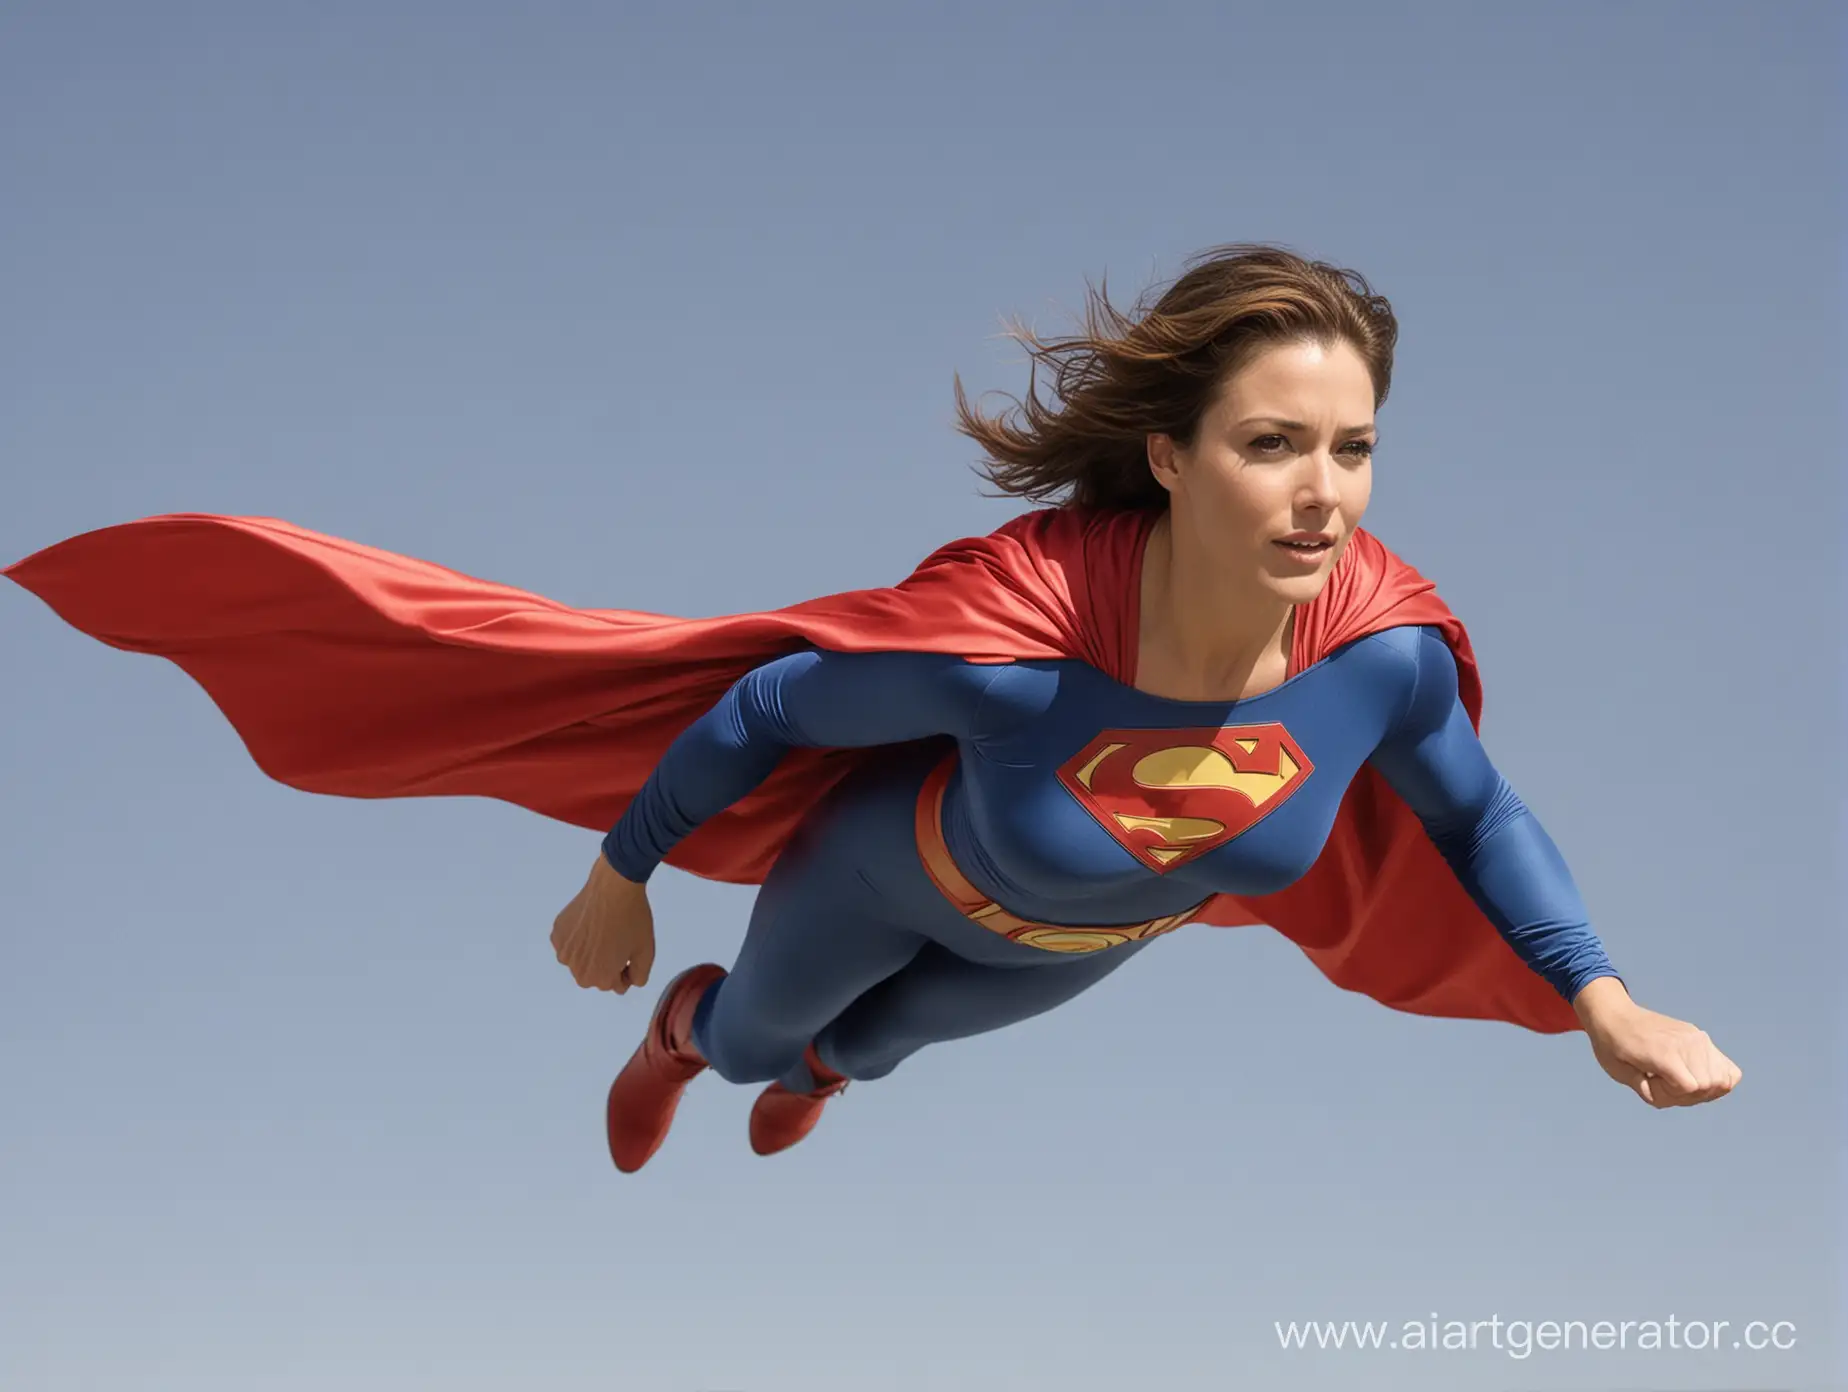 MiddleAged-Woman-Emulating-Superman-in-Classic-Costume